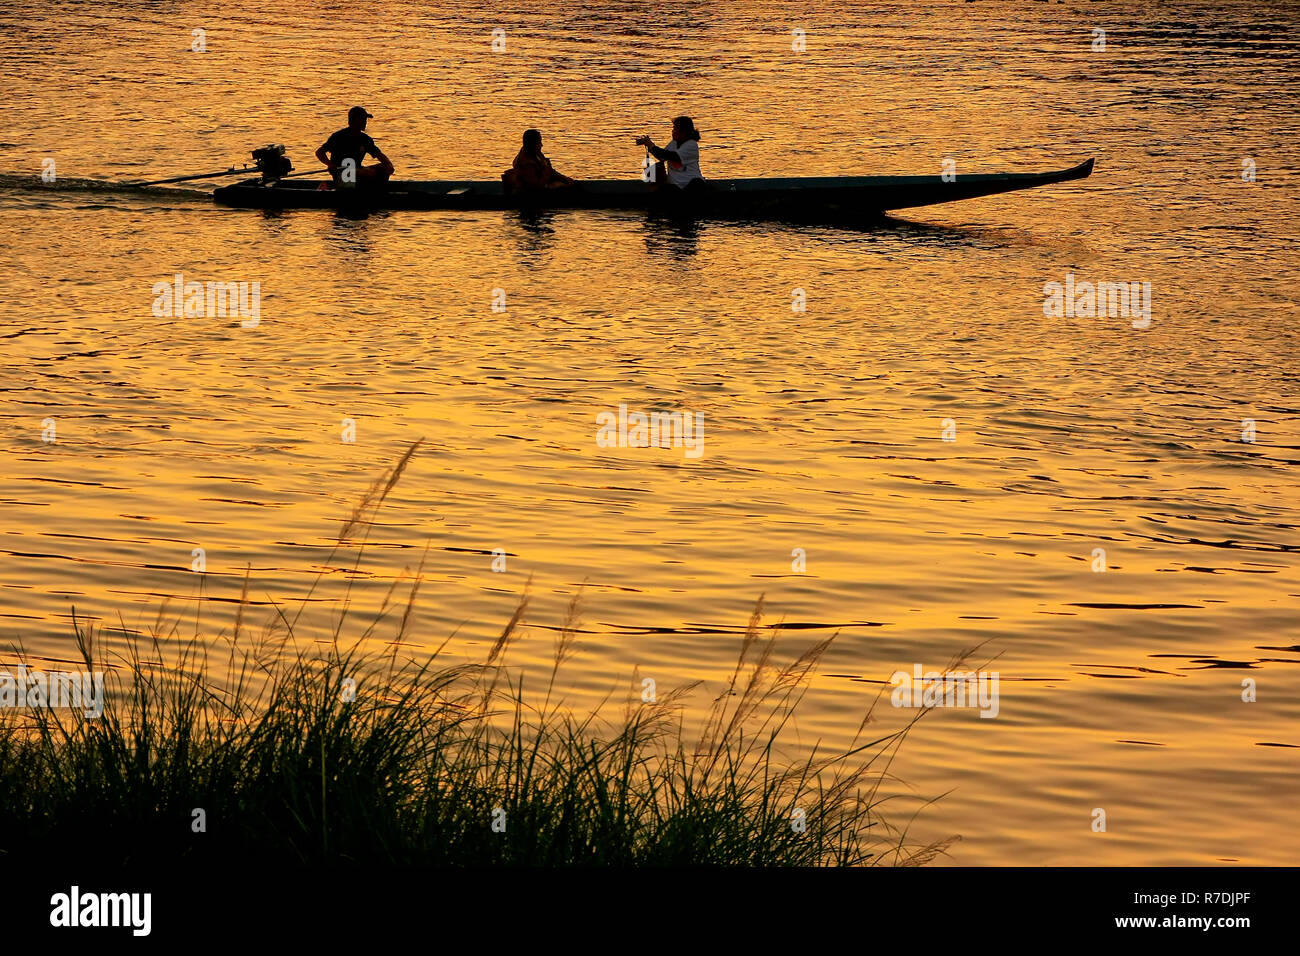 Silhouetted people in  a boat at sunset on Nam Song River in Vang Vieng, Laos. Vang Vieng is a popular destination for adventure tourism in a limeston Stock Photo